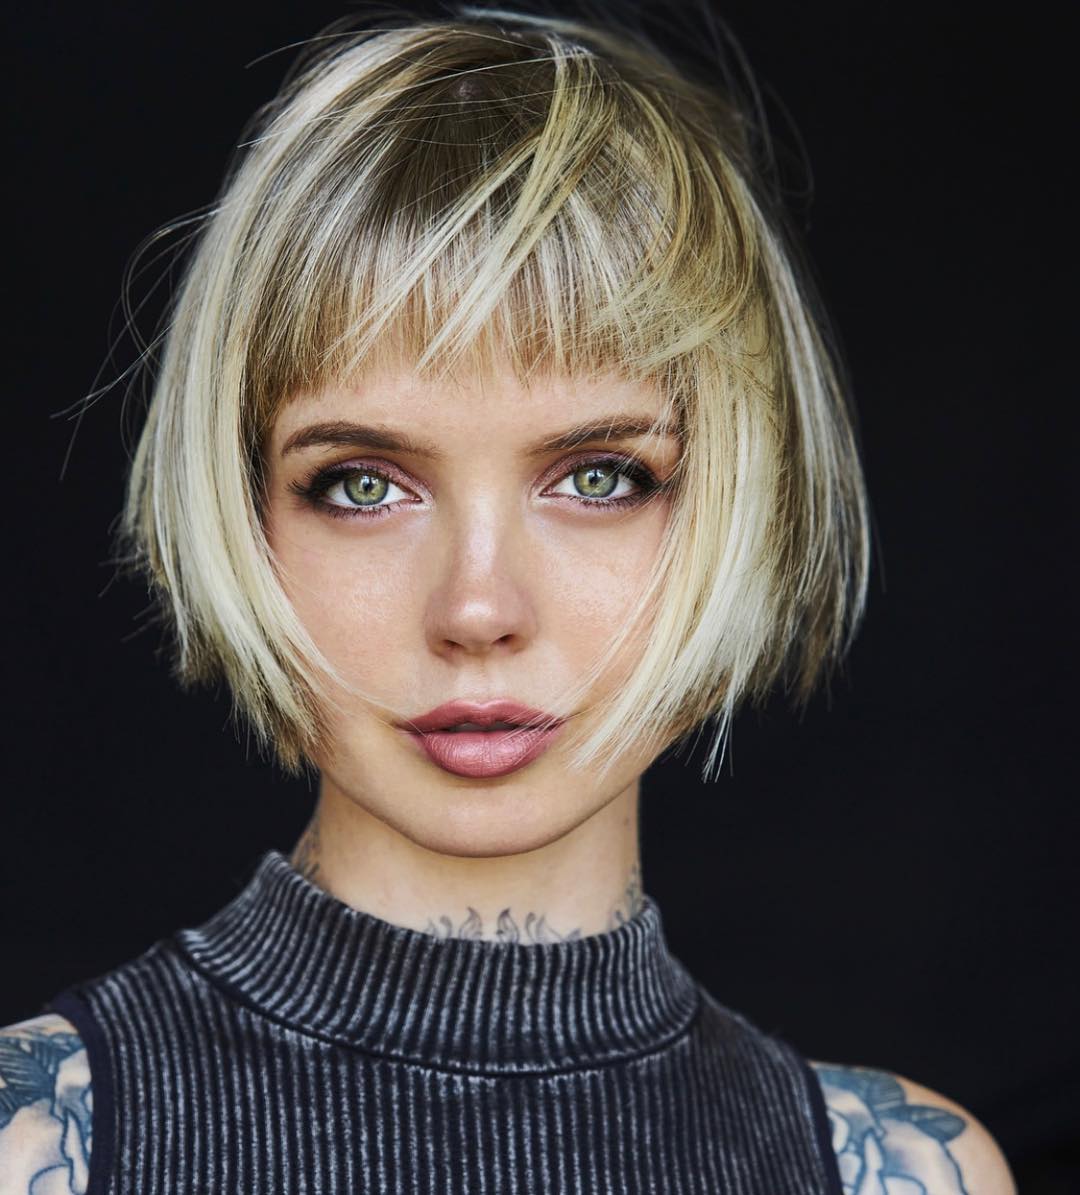 Stylish Short Hairstyles for Thick Hair, Short Haircut Ideas – Watch